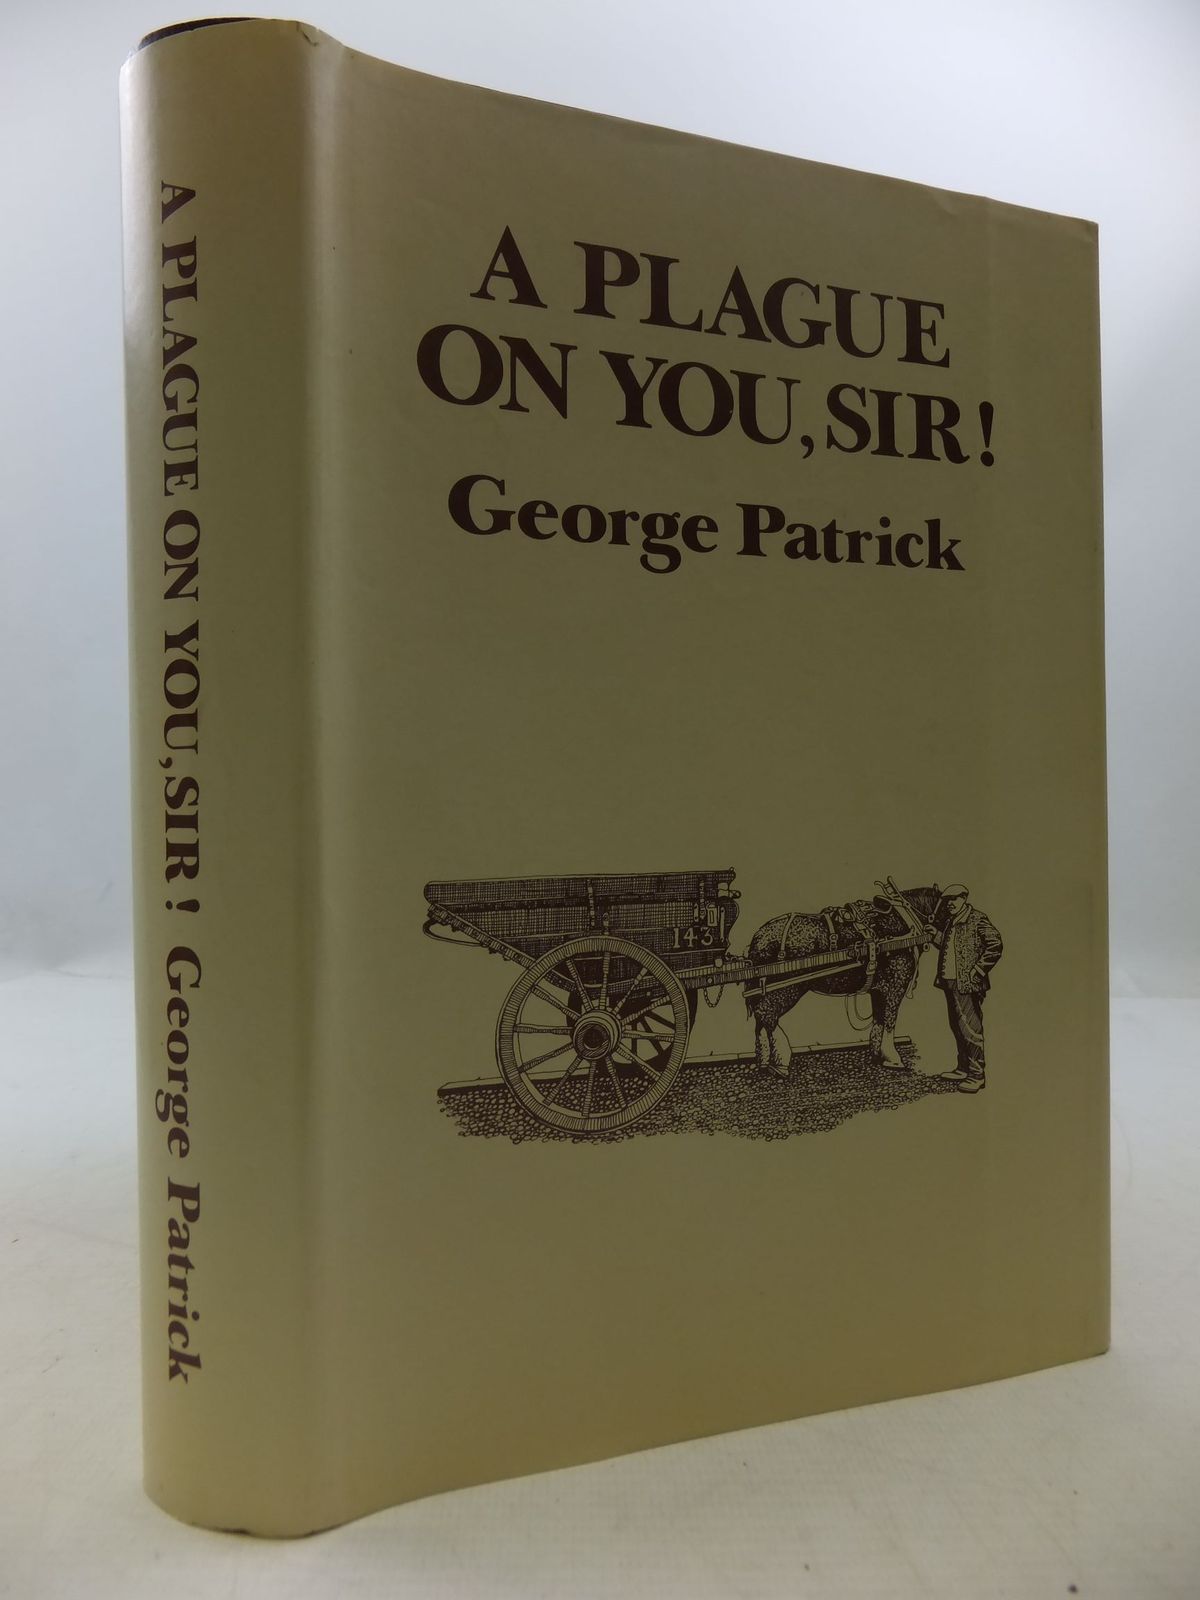 Photo of A PLAGUE ON YOU, SIR written by Patrick, George published by George Patrick (STOCK CODE: 1708851)  for sale by Stella & Rose's Books